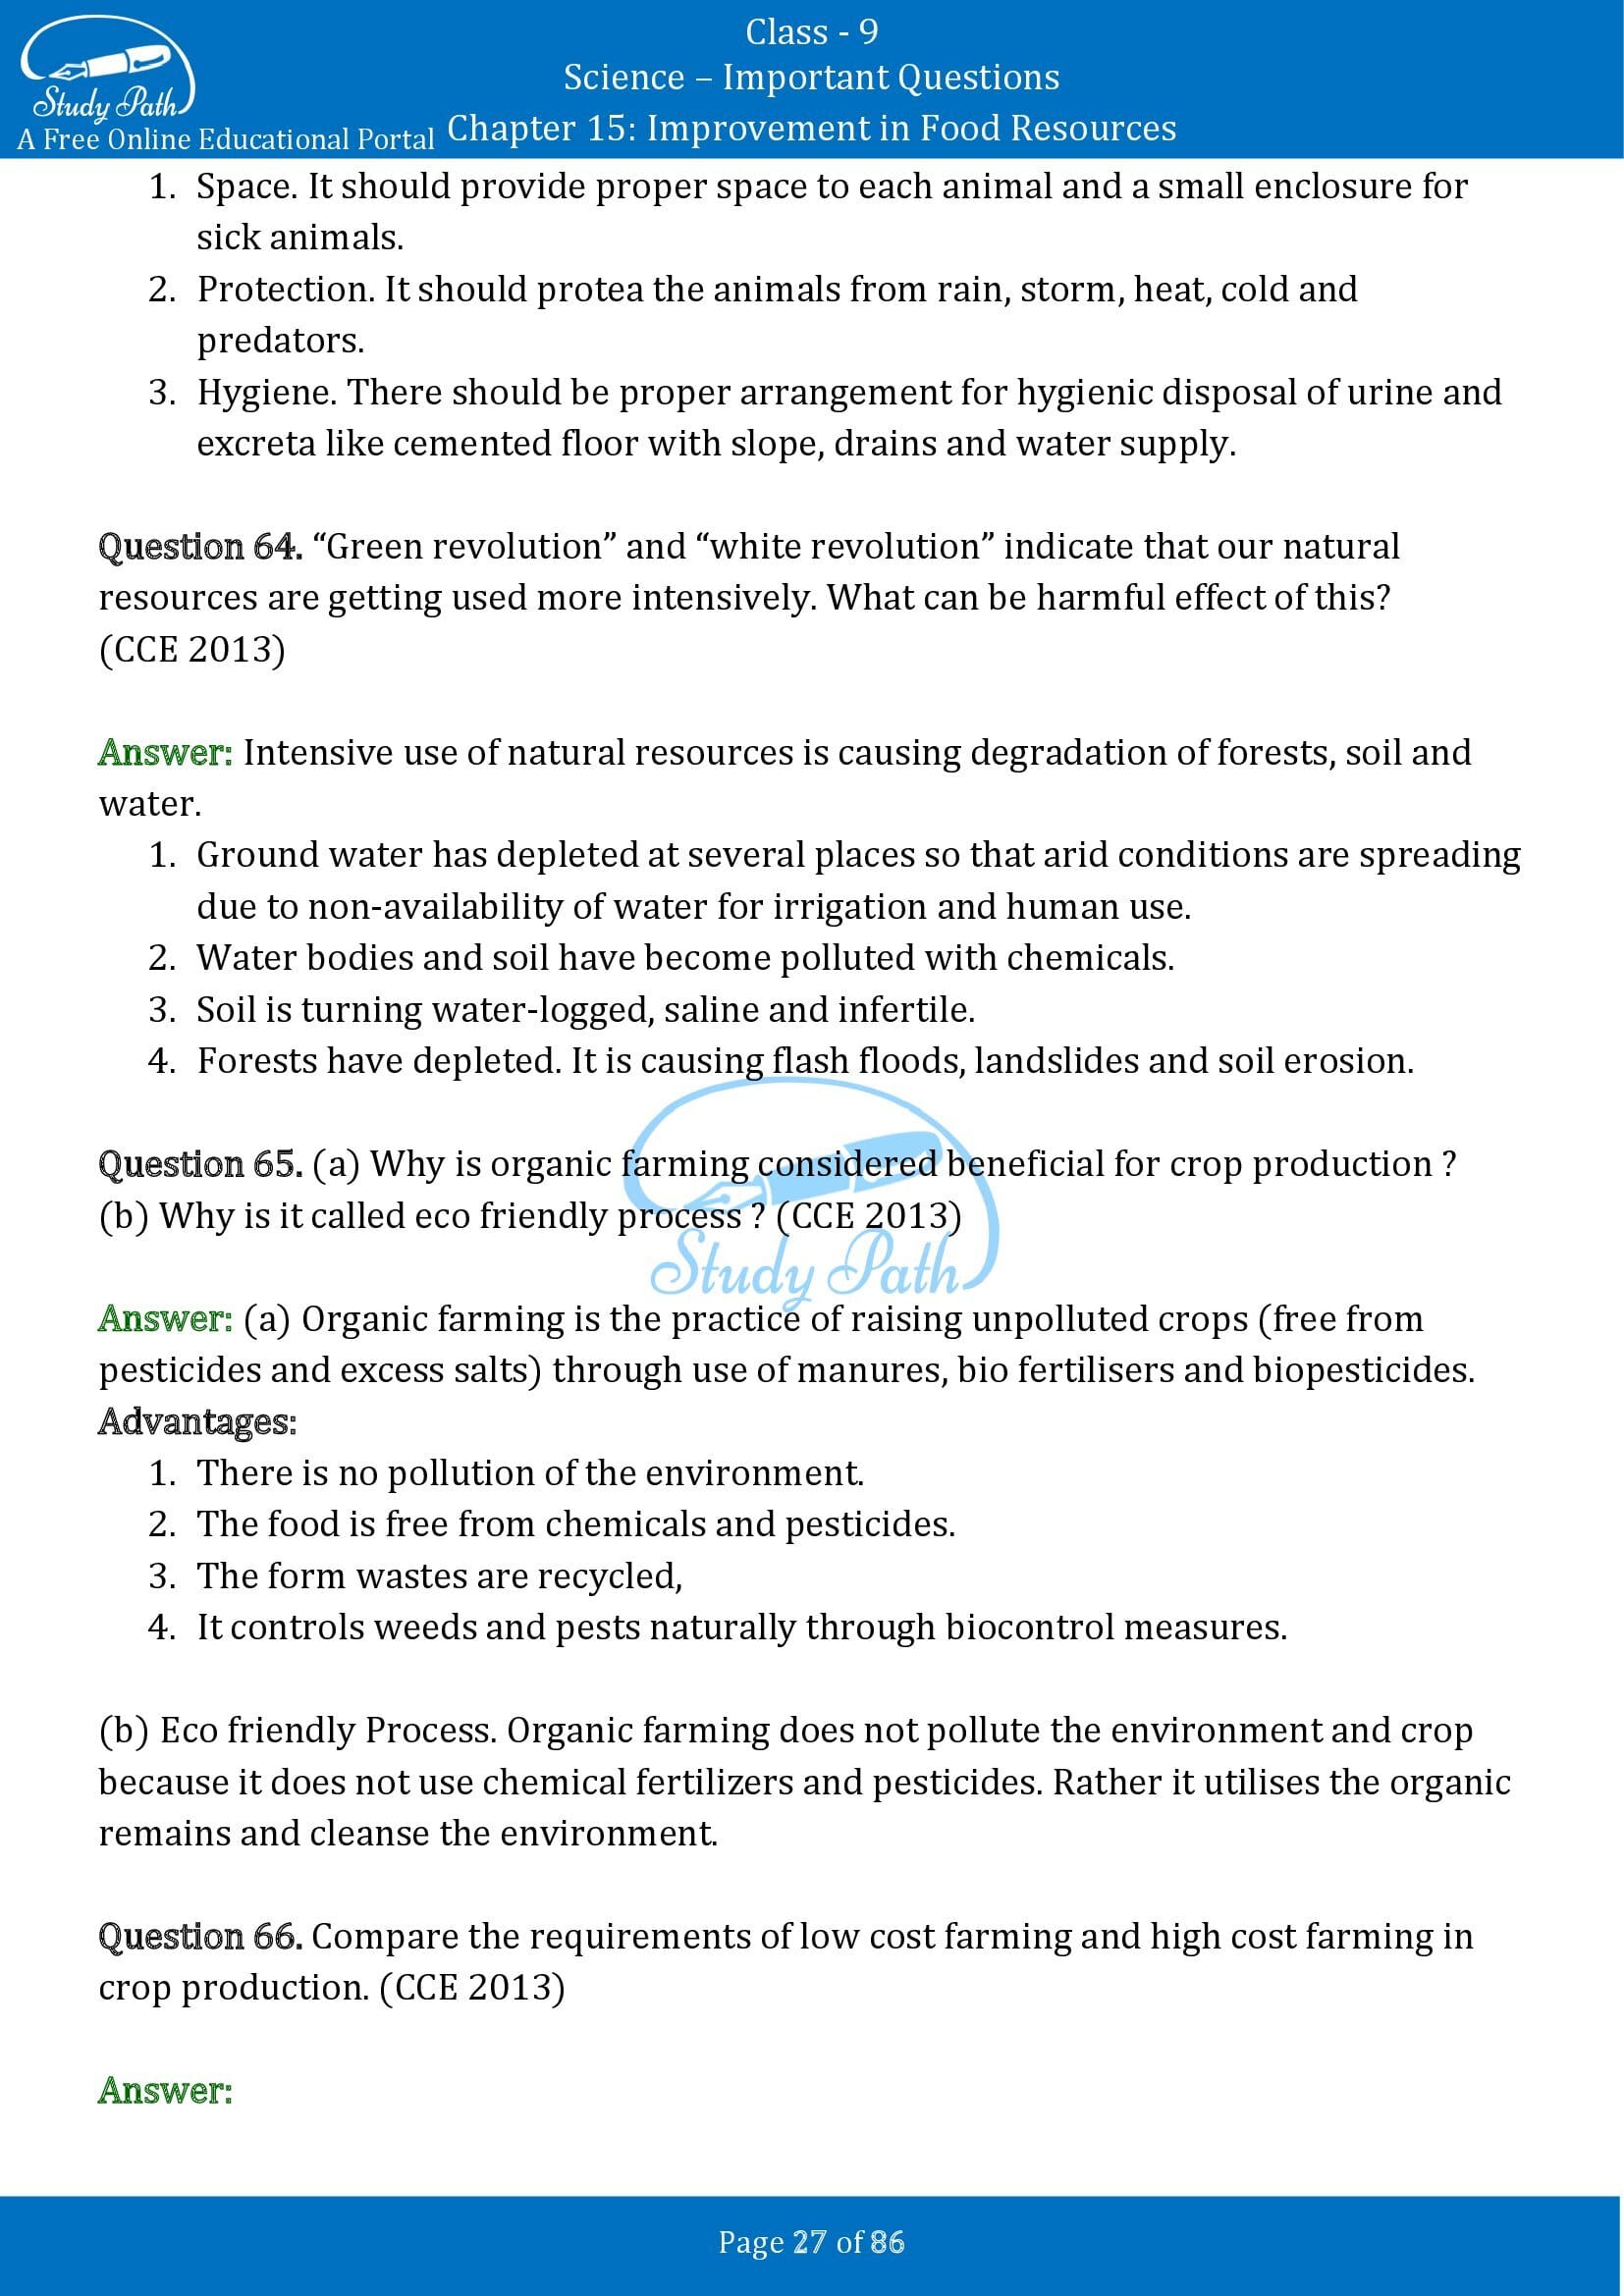 Important Questions for Class 9 Science Chapter 15 Improvement in Food Resources 00027